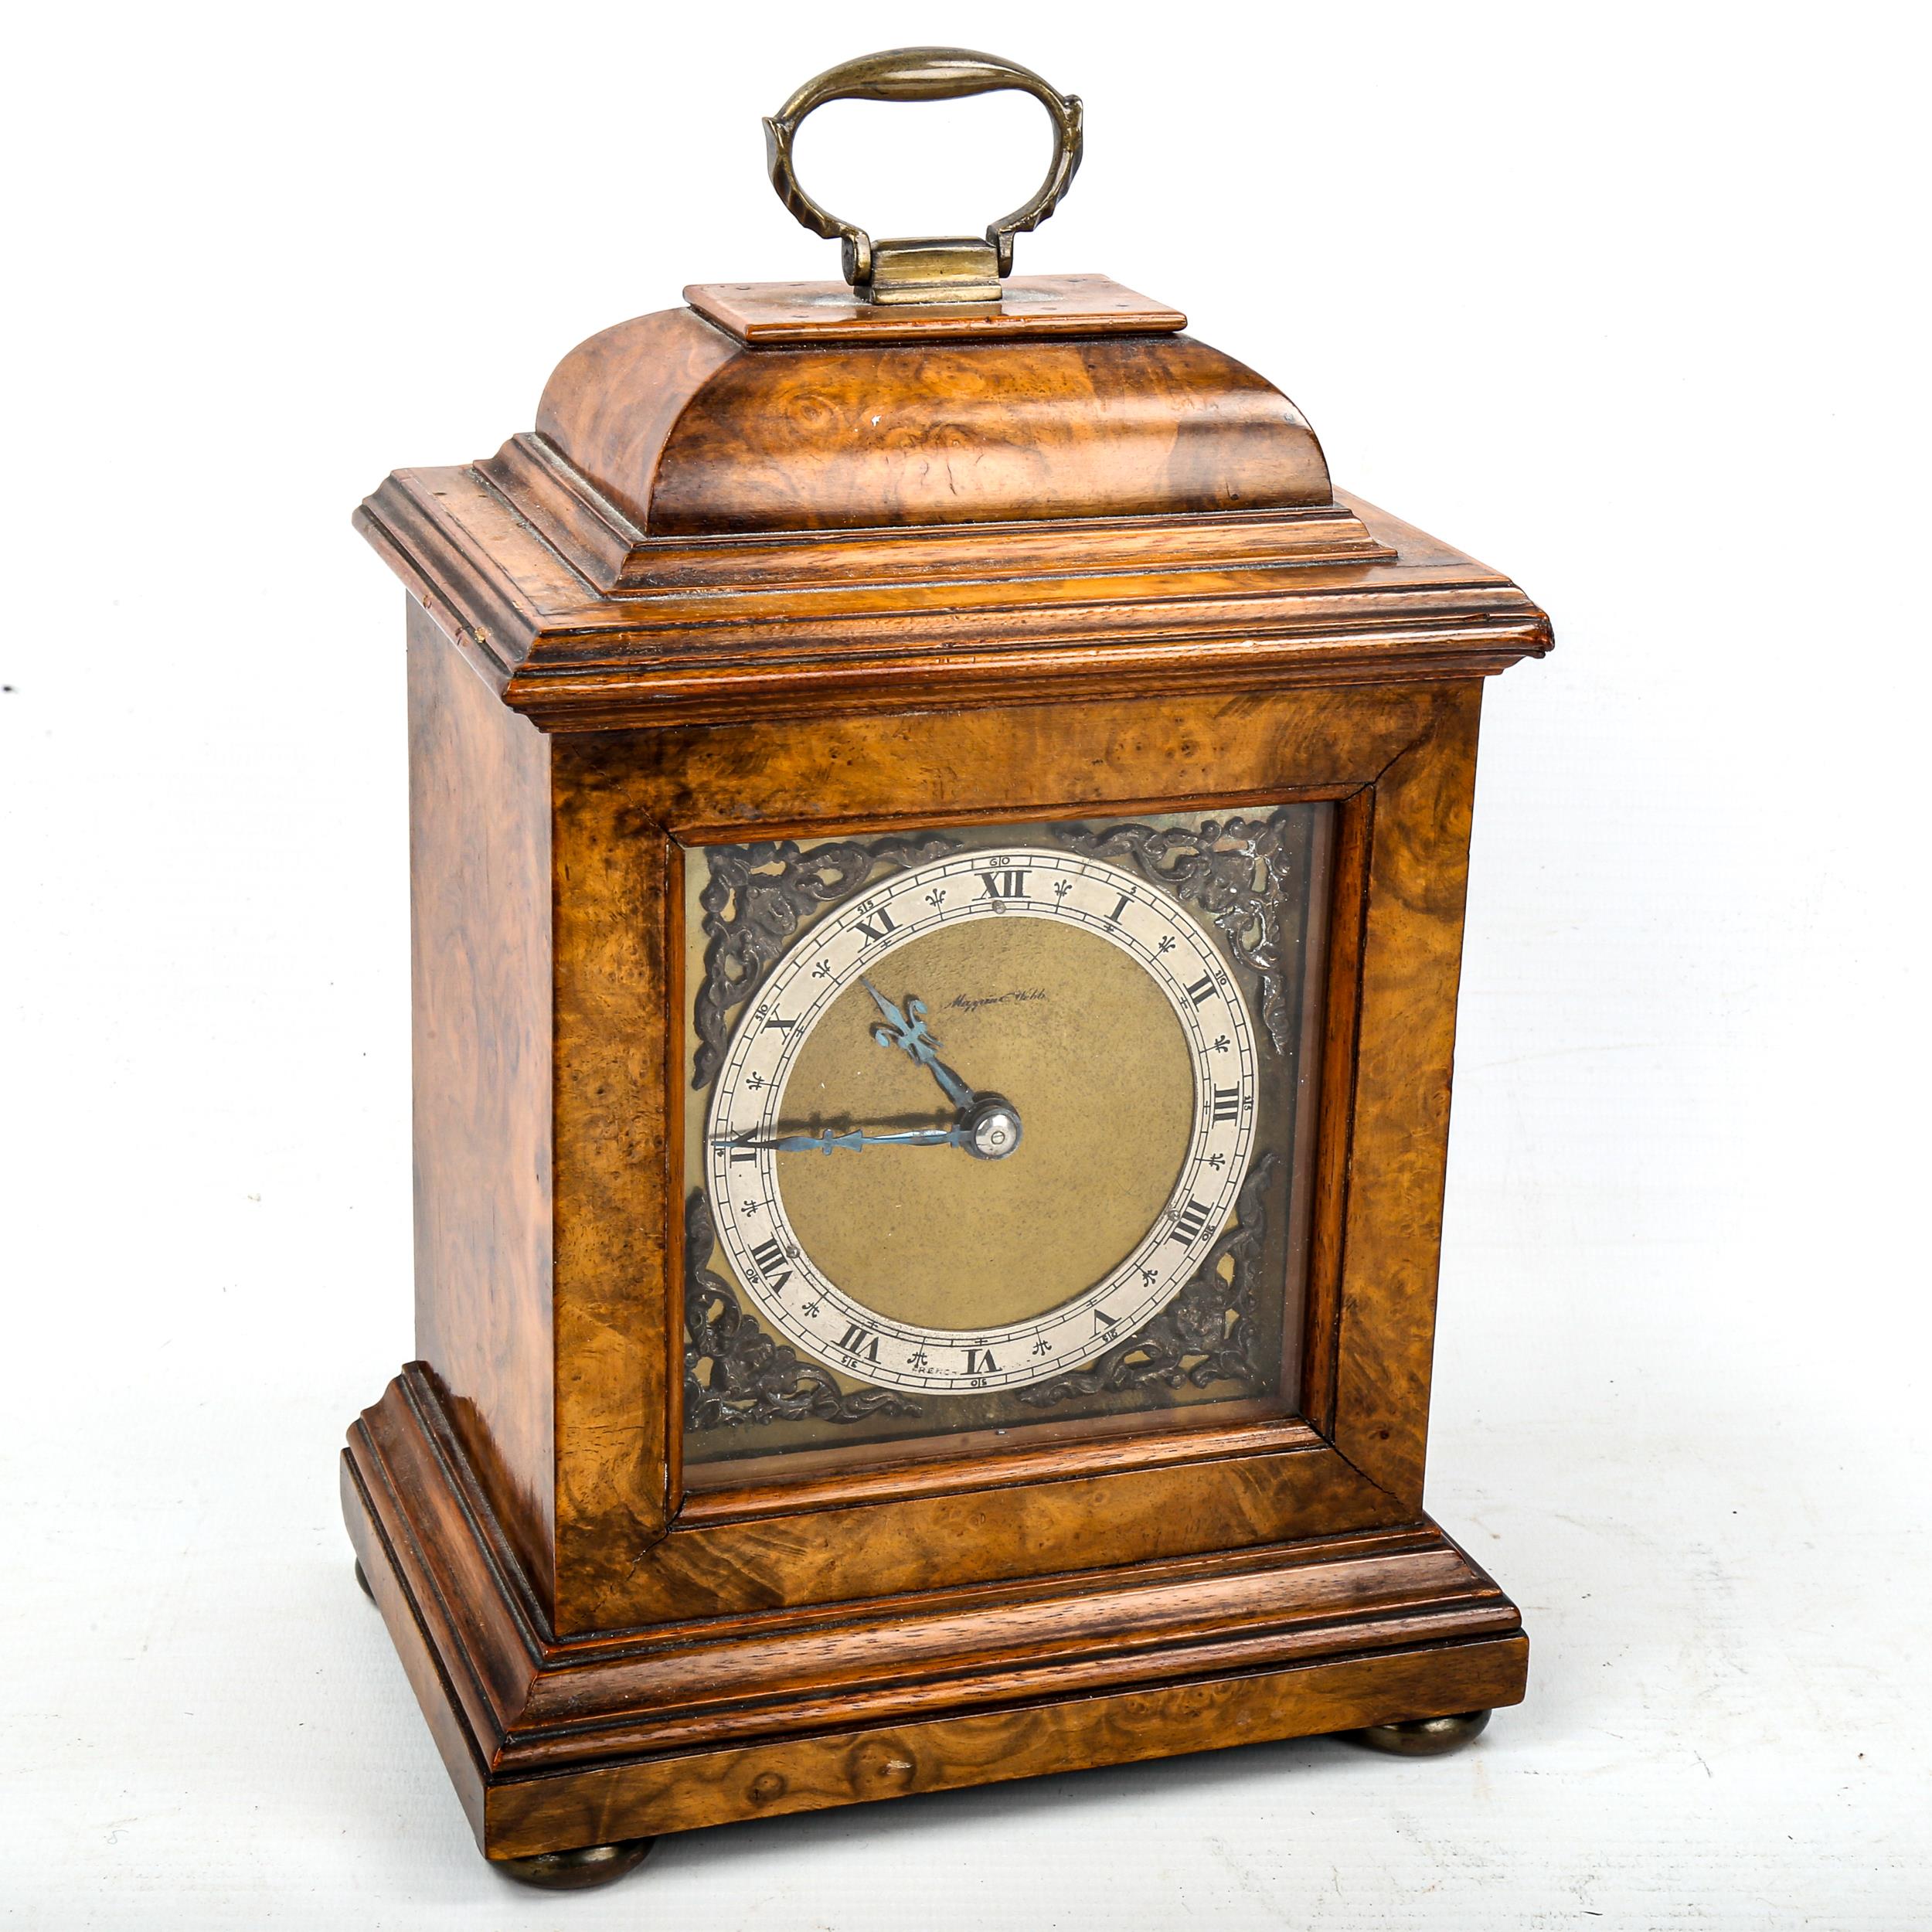 An early/mid-20th century Mappin & Webb burr-walnut bracket clock, brass dial with Roman numeral